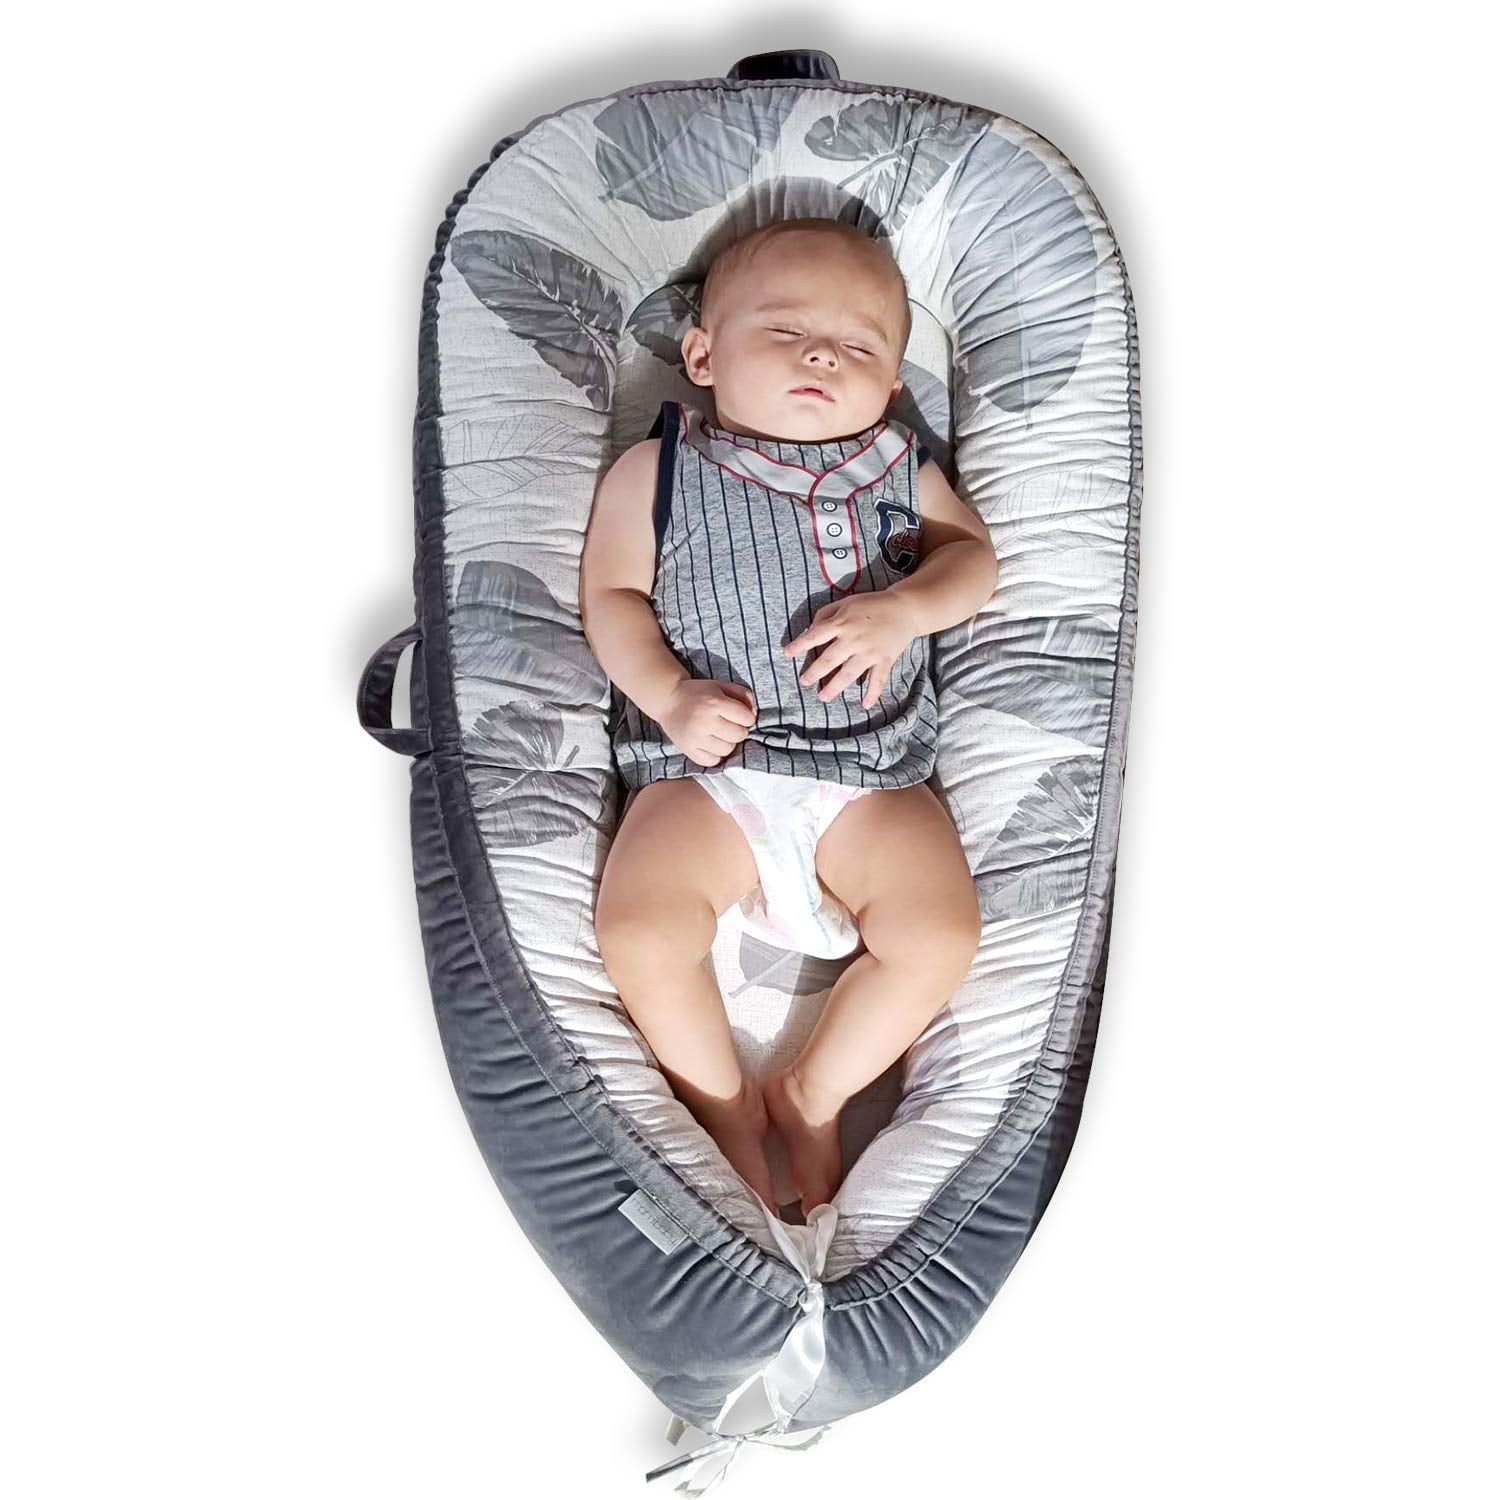 Baby Lounger Co Sleeper Infant Snuggle Baby Bassinet Breathable Hypoallergenic Cotton with Pillow and Quilt for Bed/Lounger/Nest/Pod/Cot Bed Baby Nest Sleeper for Newborn and Babies 35.4x21.7x5.9in 